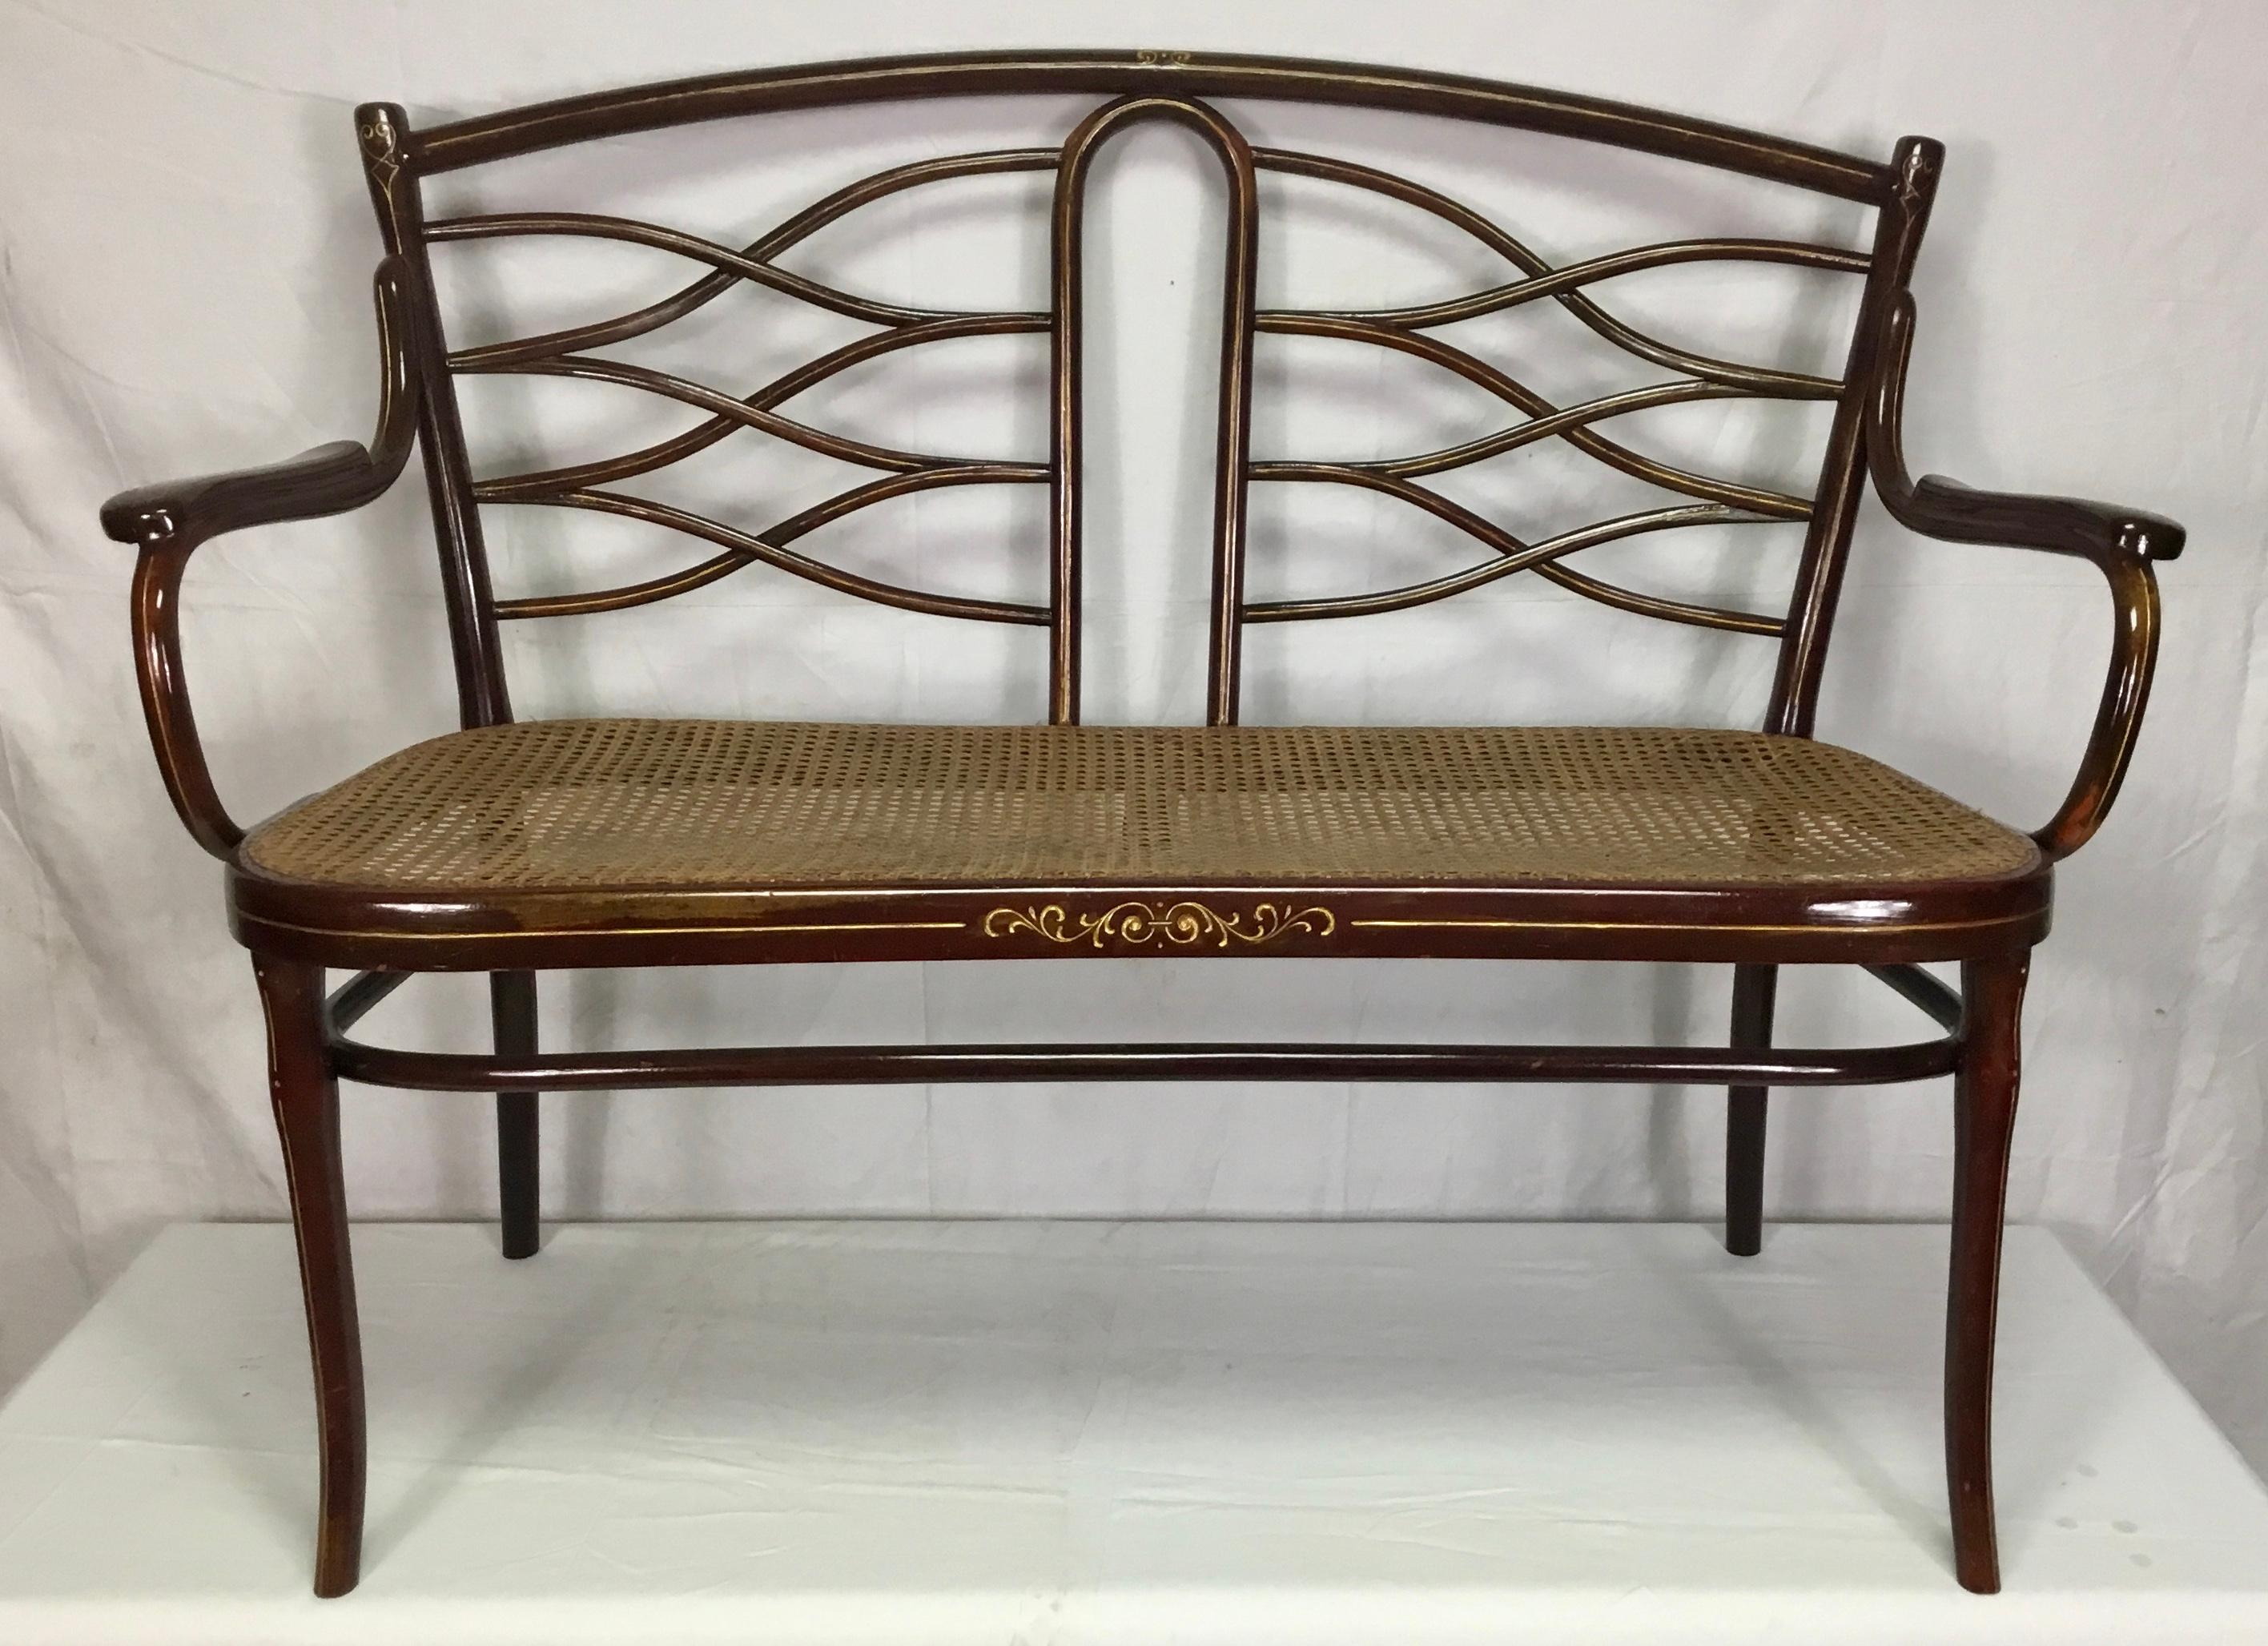 This beautiful bentwood banquette by Thonet, Austria, dates back to the late 19th century.
Its elegant bentwood frame has been highlighted with gold coloured detailing and the seat is in cane.
The original label is still present underneath as shown